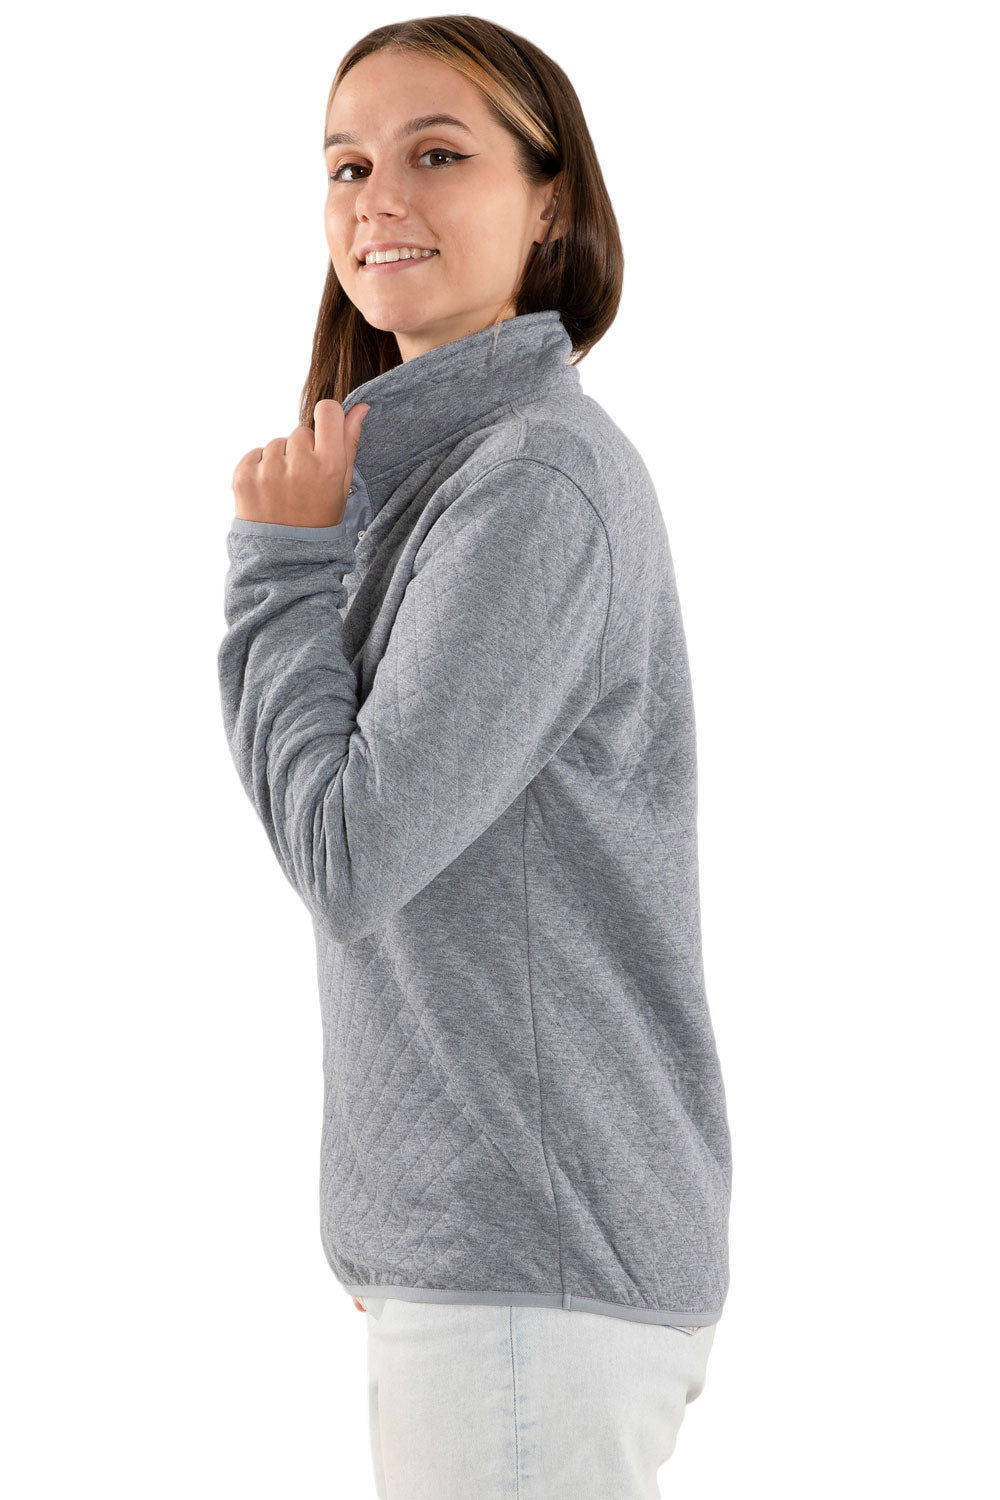 Women's Ultra Soft 1/4 Quilted Fleece Pullover Mountain Outdoor